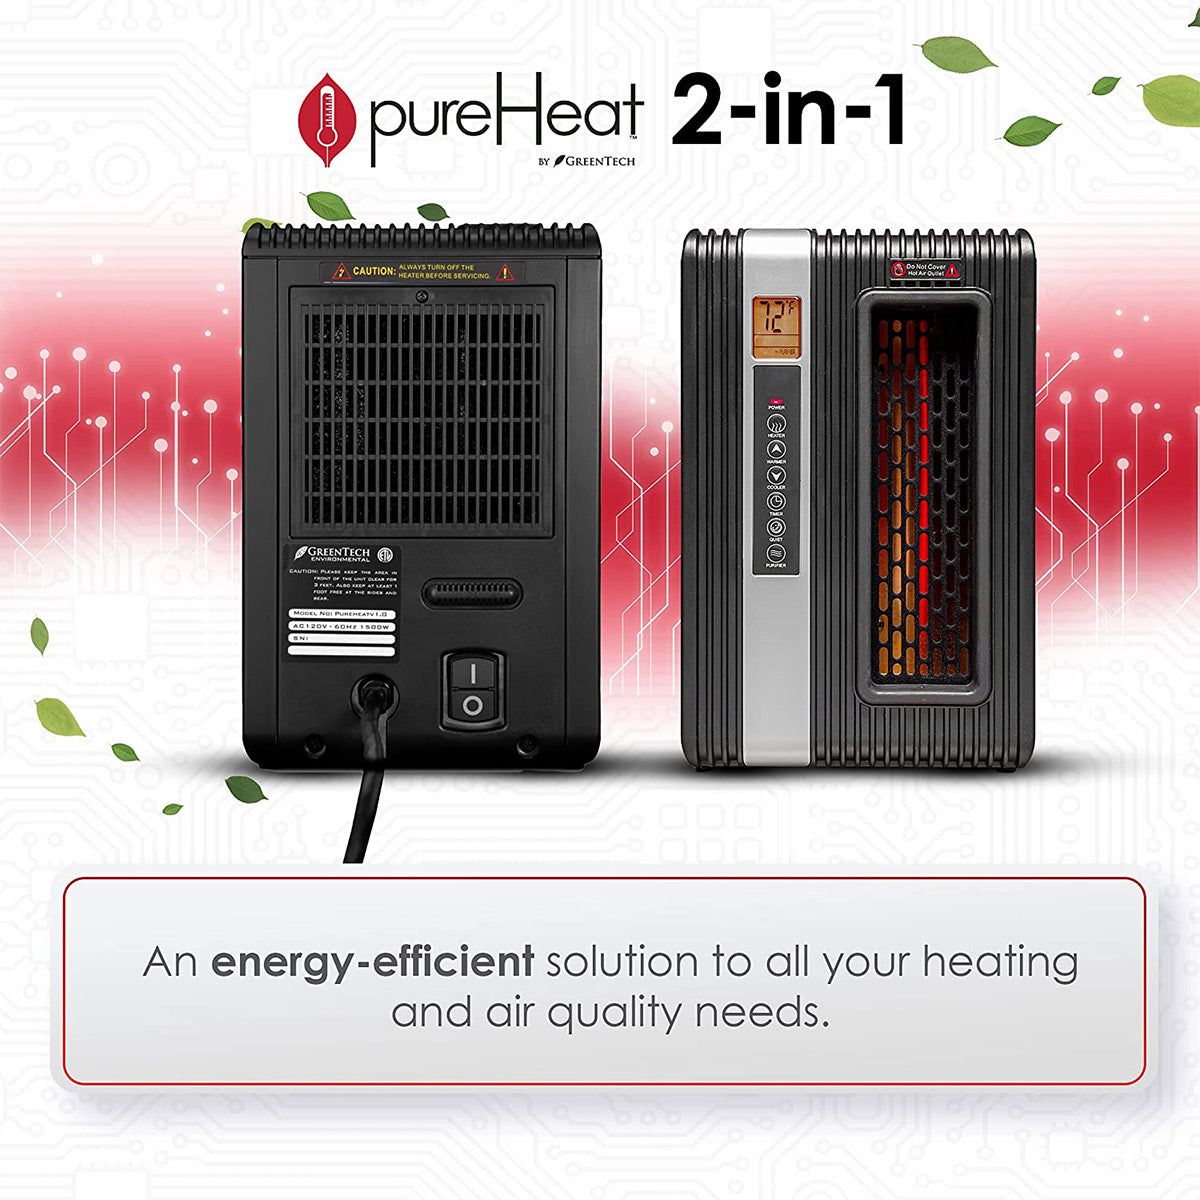 Greentech Environmental pureHeat 2-in-1 Heater with Air Purification